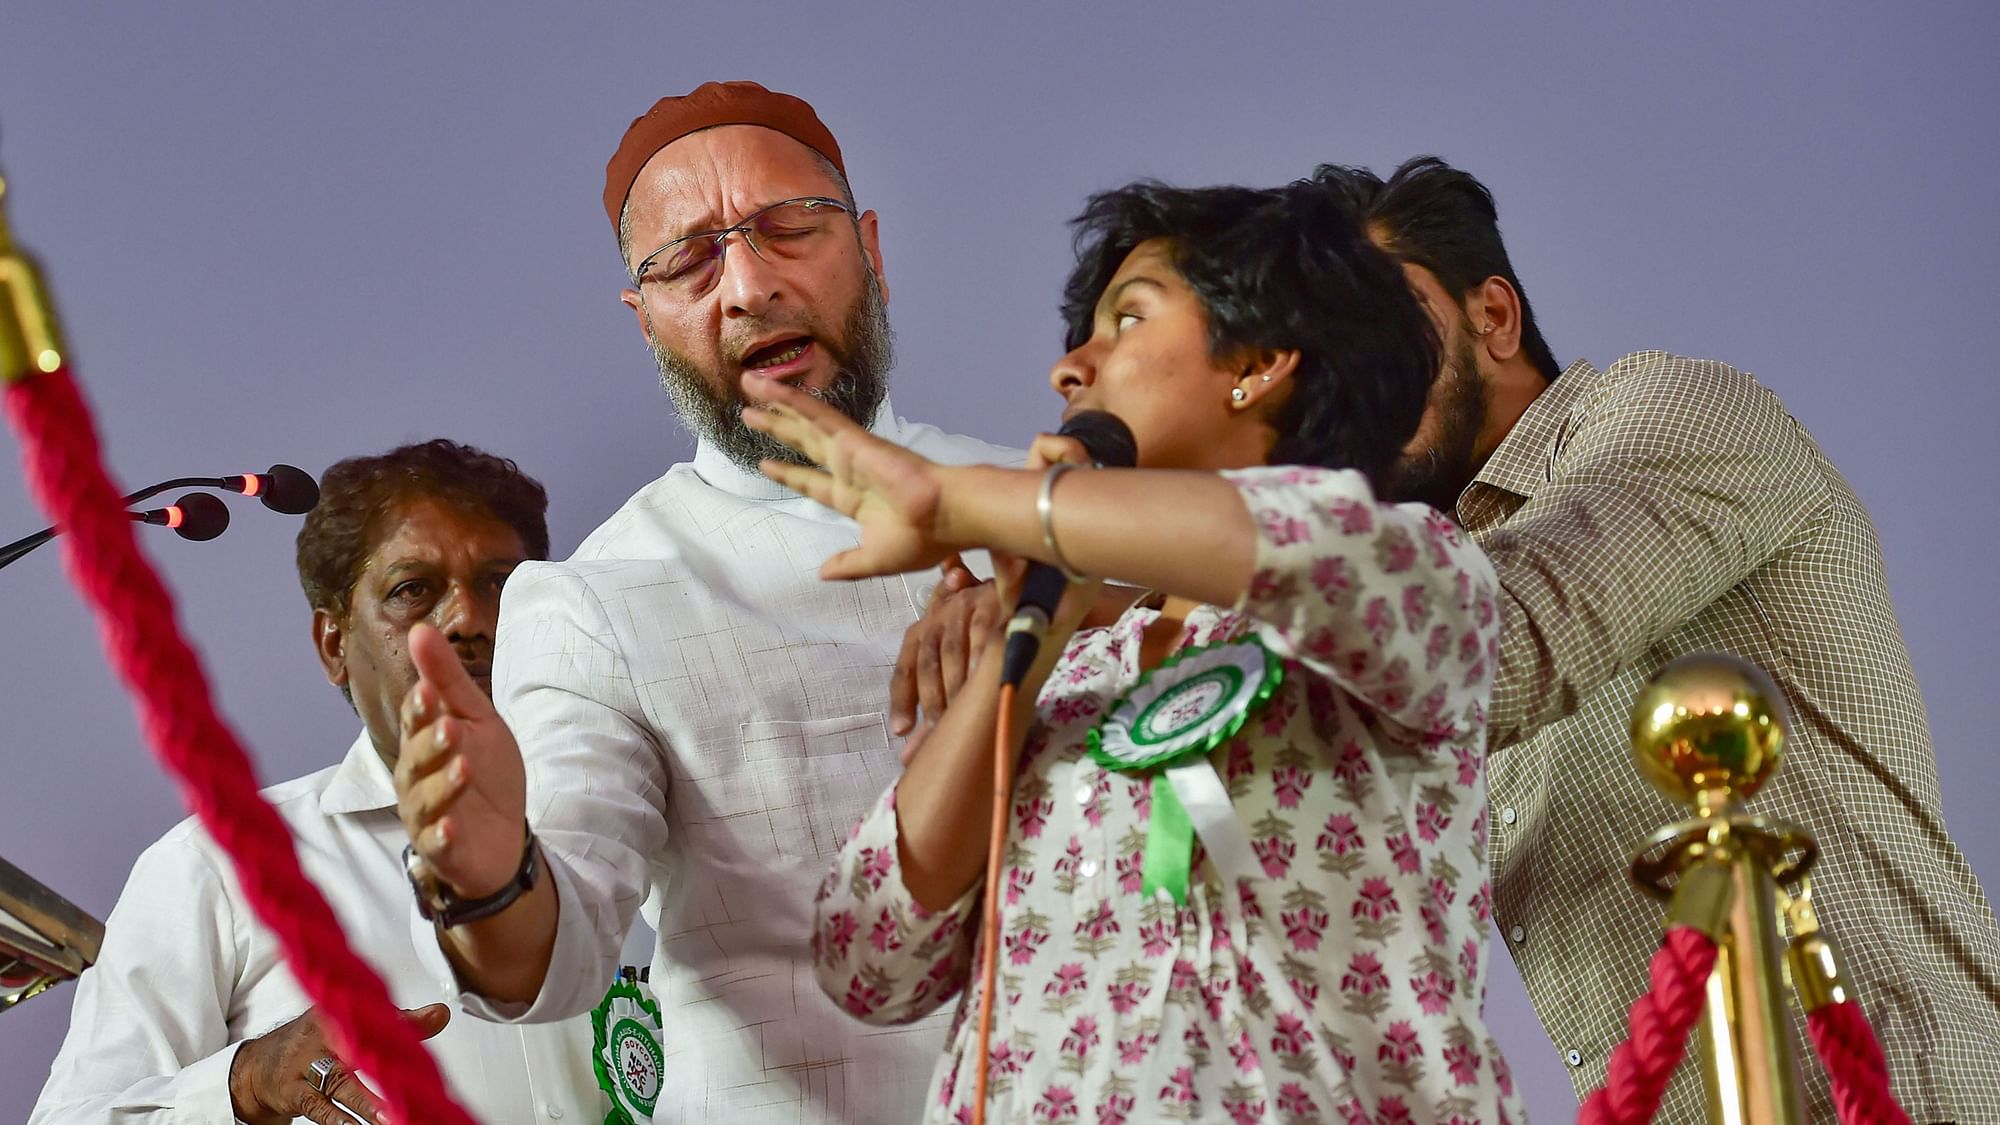 President of the AlI India MIM Asaduddin Owaisi attempts to stop a woman, identified as Amulya, who allegedly raised pro-Pakistan slogans during a protest against CAA, NRC and NPR in Bengaluru,on Thursday, 20 February.